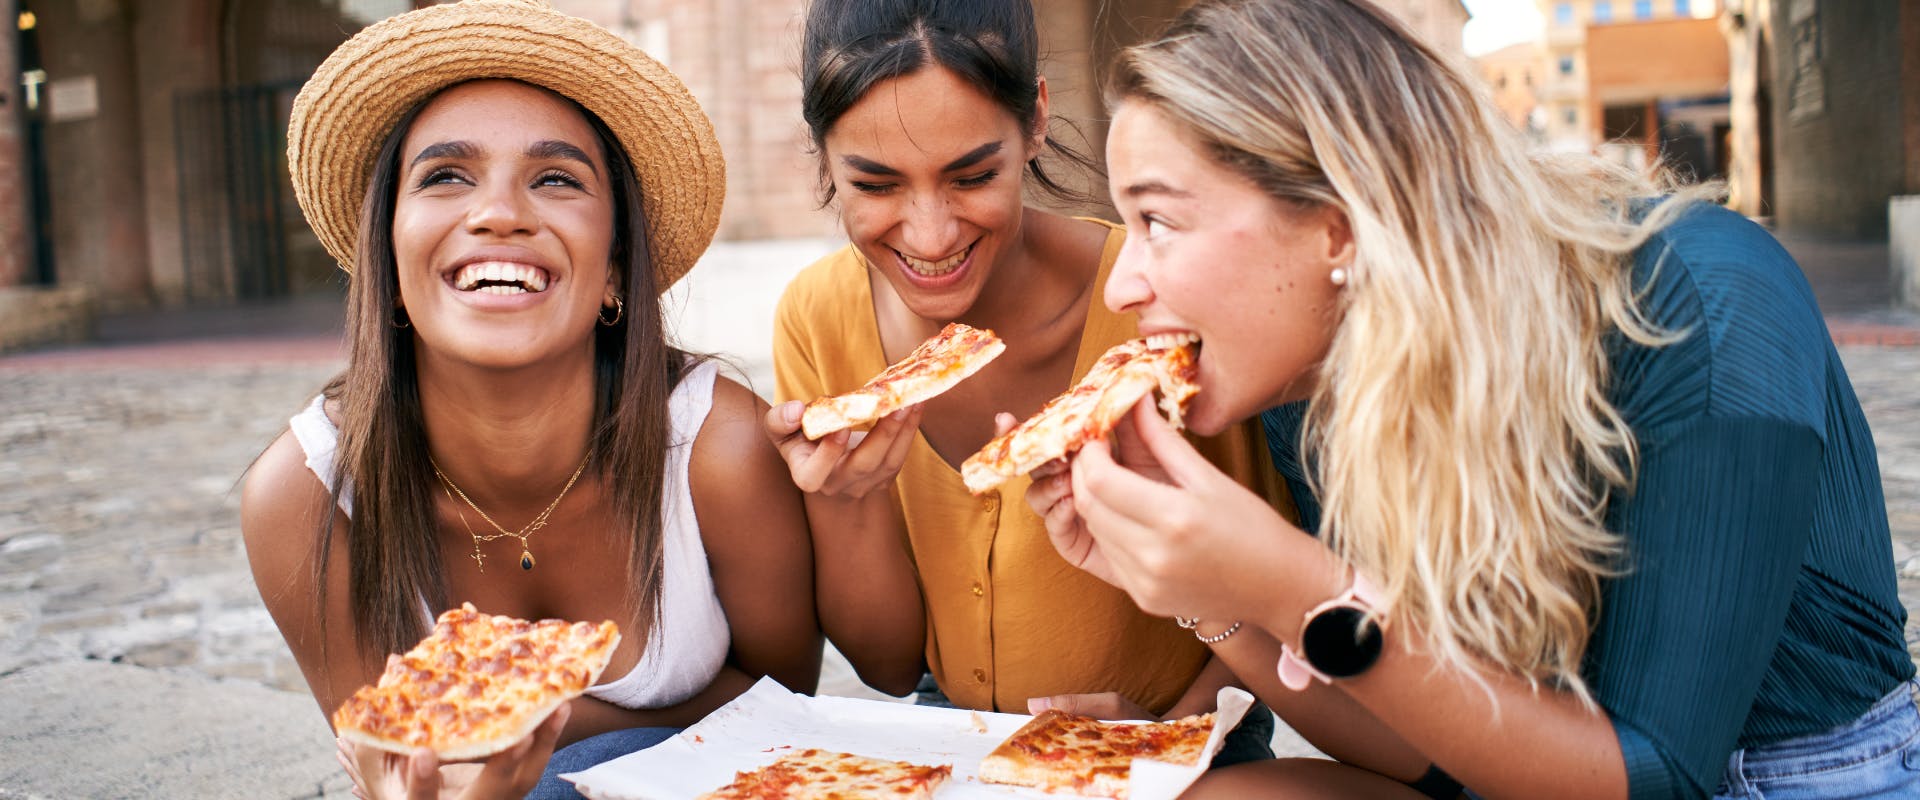 Three girls eating pizza in Rome.